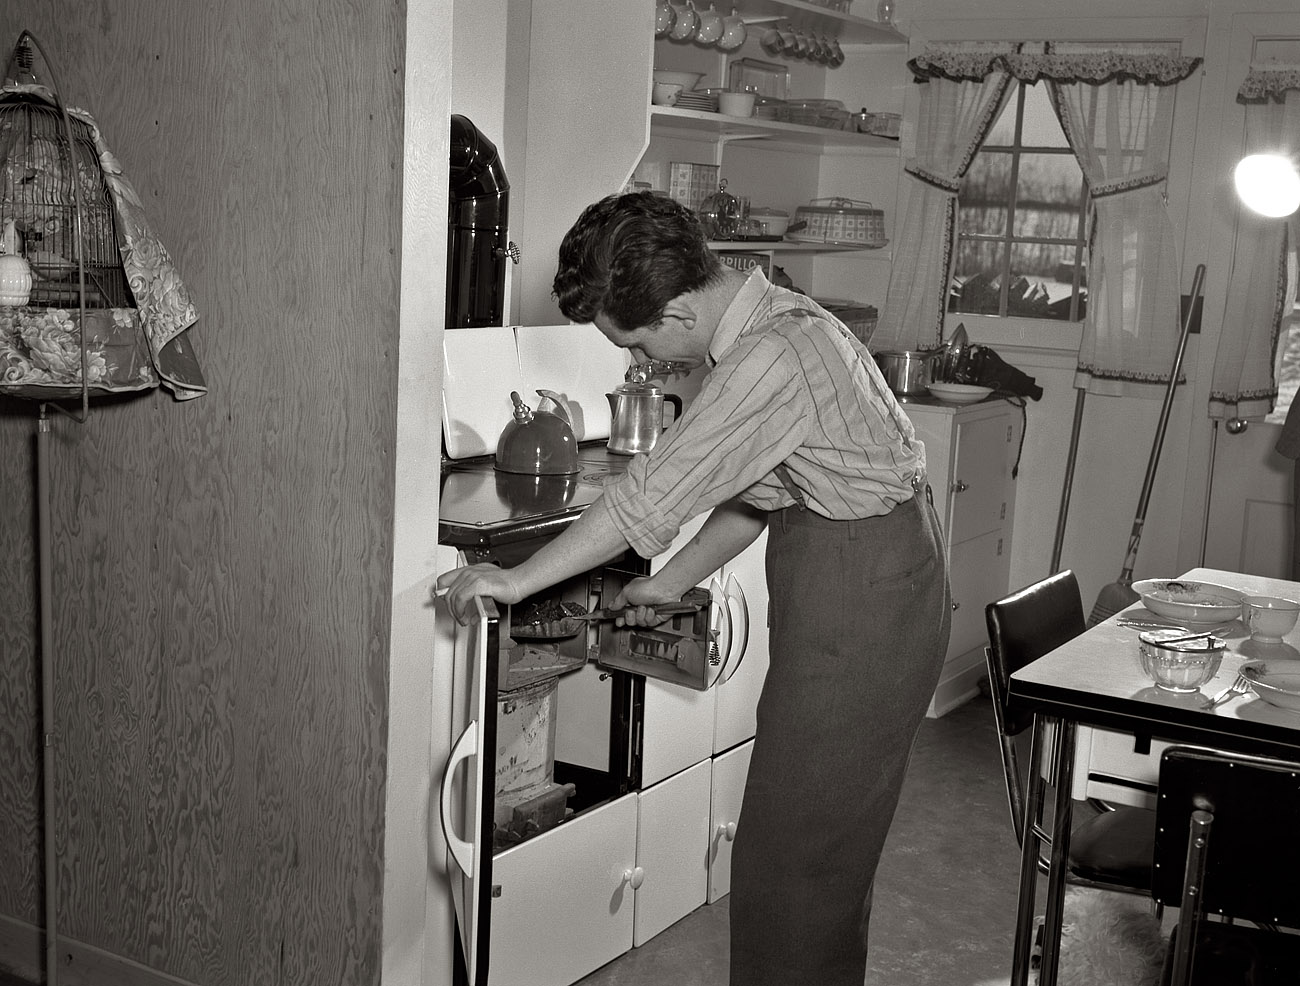 January 1942. Bantam, Connecticut. "Defense homes. The heating unit is in the kitchen of Fred Heath's four-room apartment in the new federally-financed homes for 80 families just a few minutes from the Warren McArthur factory in Bantam. The well-insulated coal fire puts steam in the radiators and provides the heat for cooking. The tenants are well-pleased although on several nights when the temperature dropped to 10 degrees below zero they were forced to replenish the fuel every two or three hours. That cigarette Fred Heath holds is not tailor-made, by the way -- he likes to roll his own." View full size. Medium-format nitrate negative by Howard Hollem for the Office for Emergency Management.
